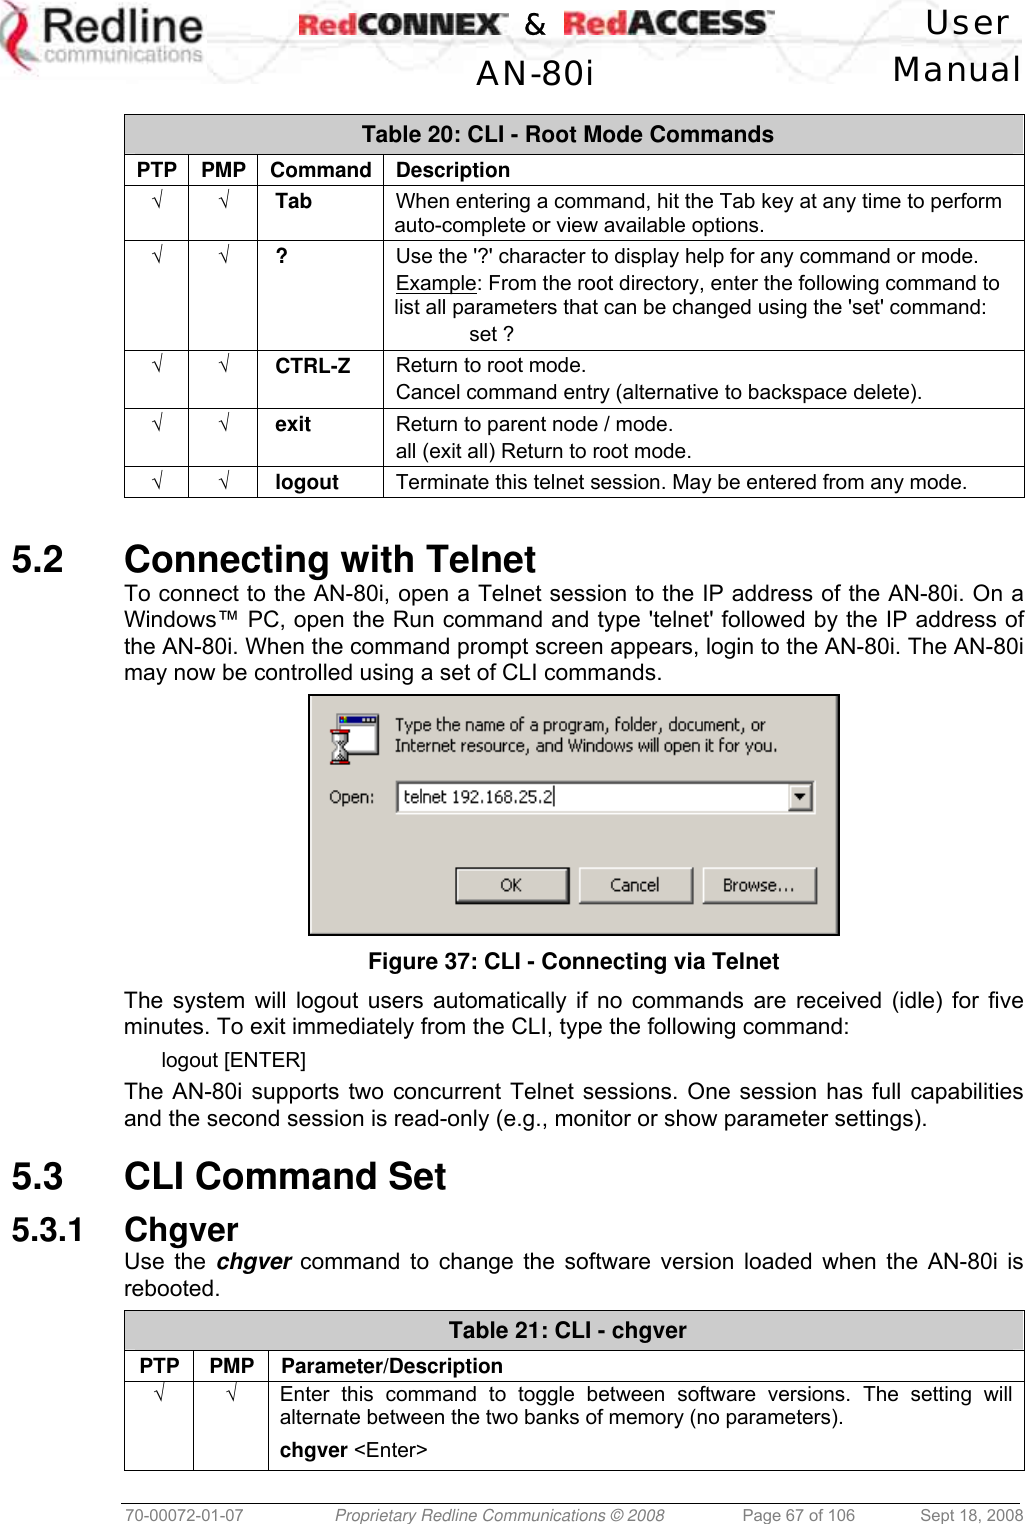    &amp;  User  AN-80i Manual  70-00072-01-07  Proprietary Redline Communications © 2008  Page 67 of 106  Sept 18, 2008  Table 20: CLI - Root Mode Commands PTP PMP Command Description √ √ Tab  When entering a command, hit the Tab key at any time to perform auto-complete or view available options. √ √ ?  Use the &apos;?&apos; character to display help for any command or mode. Example: From the root directory, enter the following command to list all parameters that can be changed using the &apos;set&apos; command:  set ? √ √ CTRL-Z  Return to root mode. Cancel command entry (alternative to backspace delete). √ √ exit  Return to parent node / mode. all (exit all) Return to root mode. √ √ logout  Terminate this telnet session. May be entered from any mode.  5.2  Connecting with Telnet To connect to the AN-80i, open a Telnet session to the IP address of the AN-80i. On a Windows™ PC, open the Run command and type &apos;telnet&apos; followed by the IP address of the AN-80i. When the command prompt screen appears, login to the AN-80i. The AN-80i may now be controlled using a set of CLI commands.  Figure 37: CLI - Connecting via Telnet The system will logout users automatically if no commands are received (idle) for five minutes. To exit immediately from the CLI, type the following command: logout [ENTER] The AN-80i supports two concurrent Telnet sessions. One session has full capabilities and the second session is read-only (e.g., monitor or show parameter settings).  5.3  CLI Command Set 5.3.1 Chgver Use the chgver command to change the software version loaded when the AN-80i is rebooted. Table 21: CLI - chgver PTP PMP Parameter/Description √ √  Enter this command to toggle between software versions. The setting will alternate between the two banks of memory (no parameters). chgver &lt;Enter&gt;  